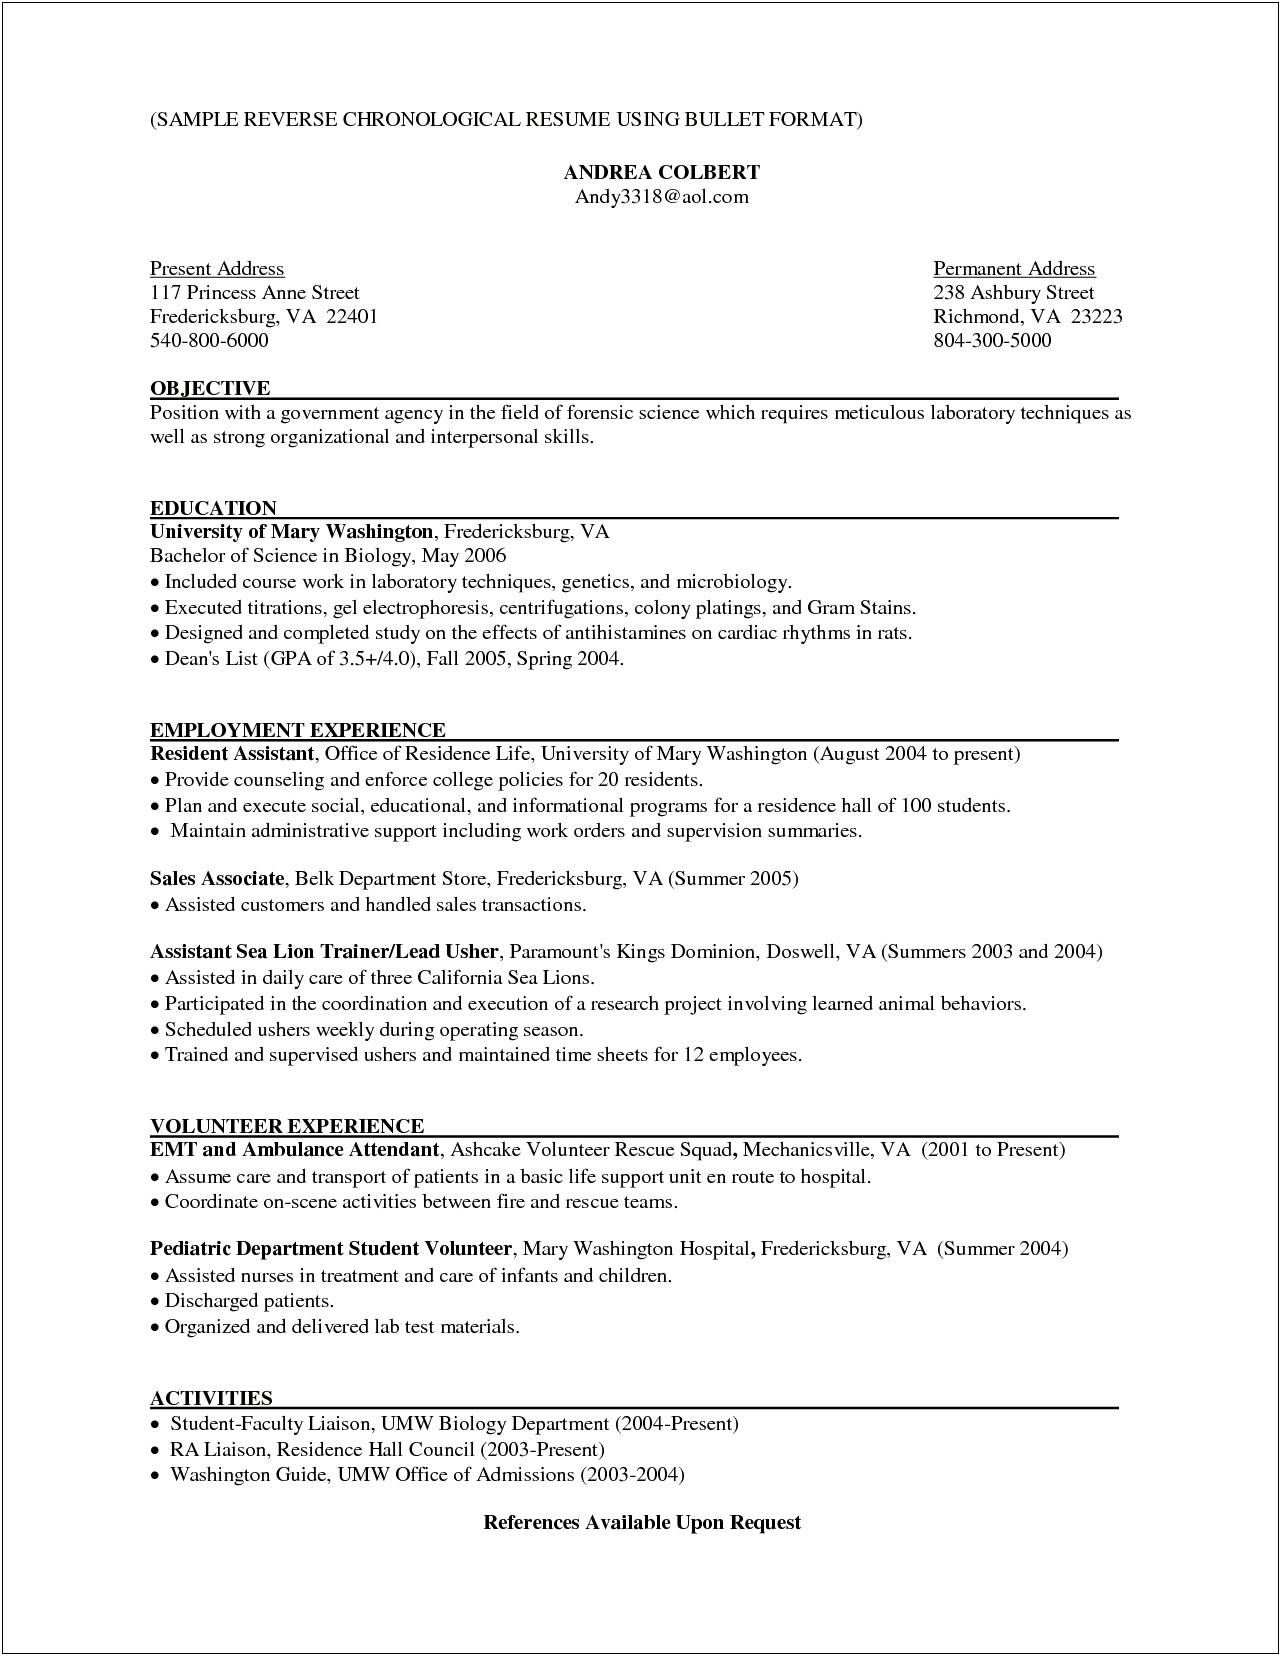 Resume Objective For Sales Role